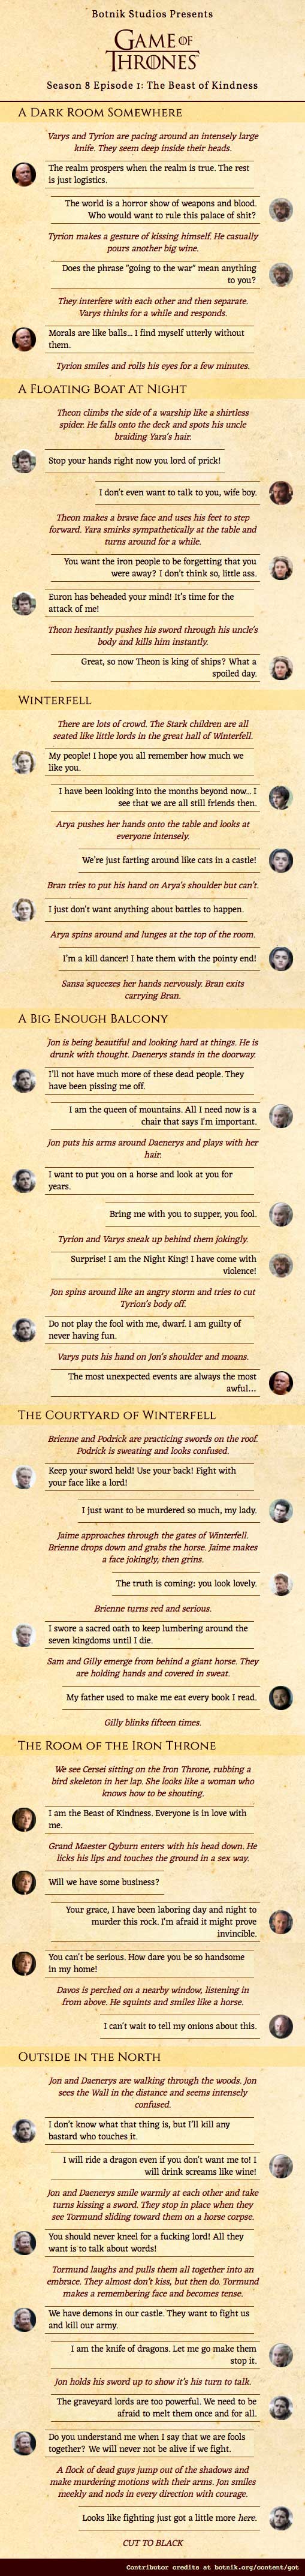 game of thrones beyond the wall script